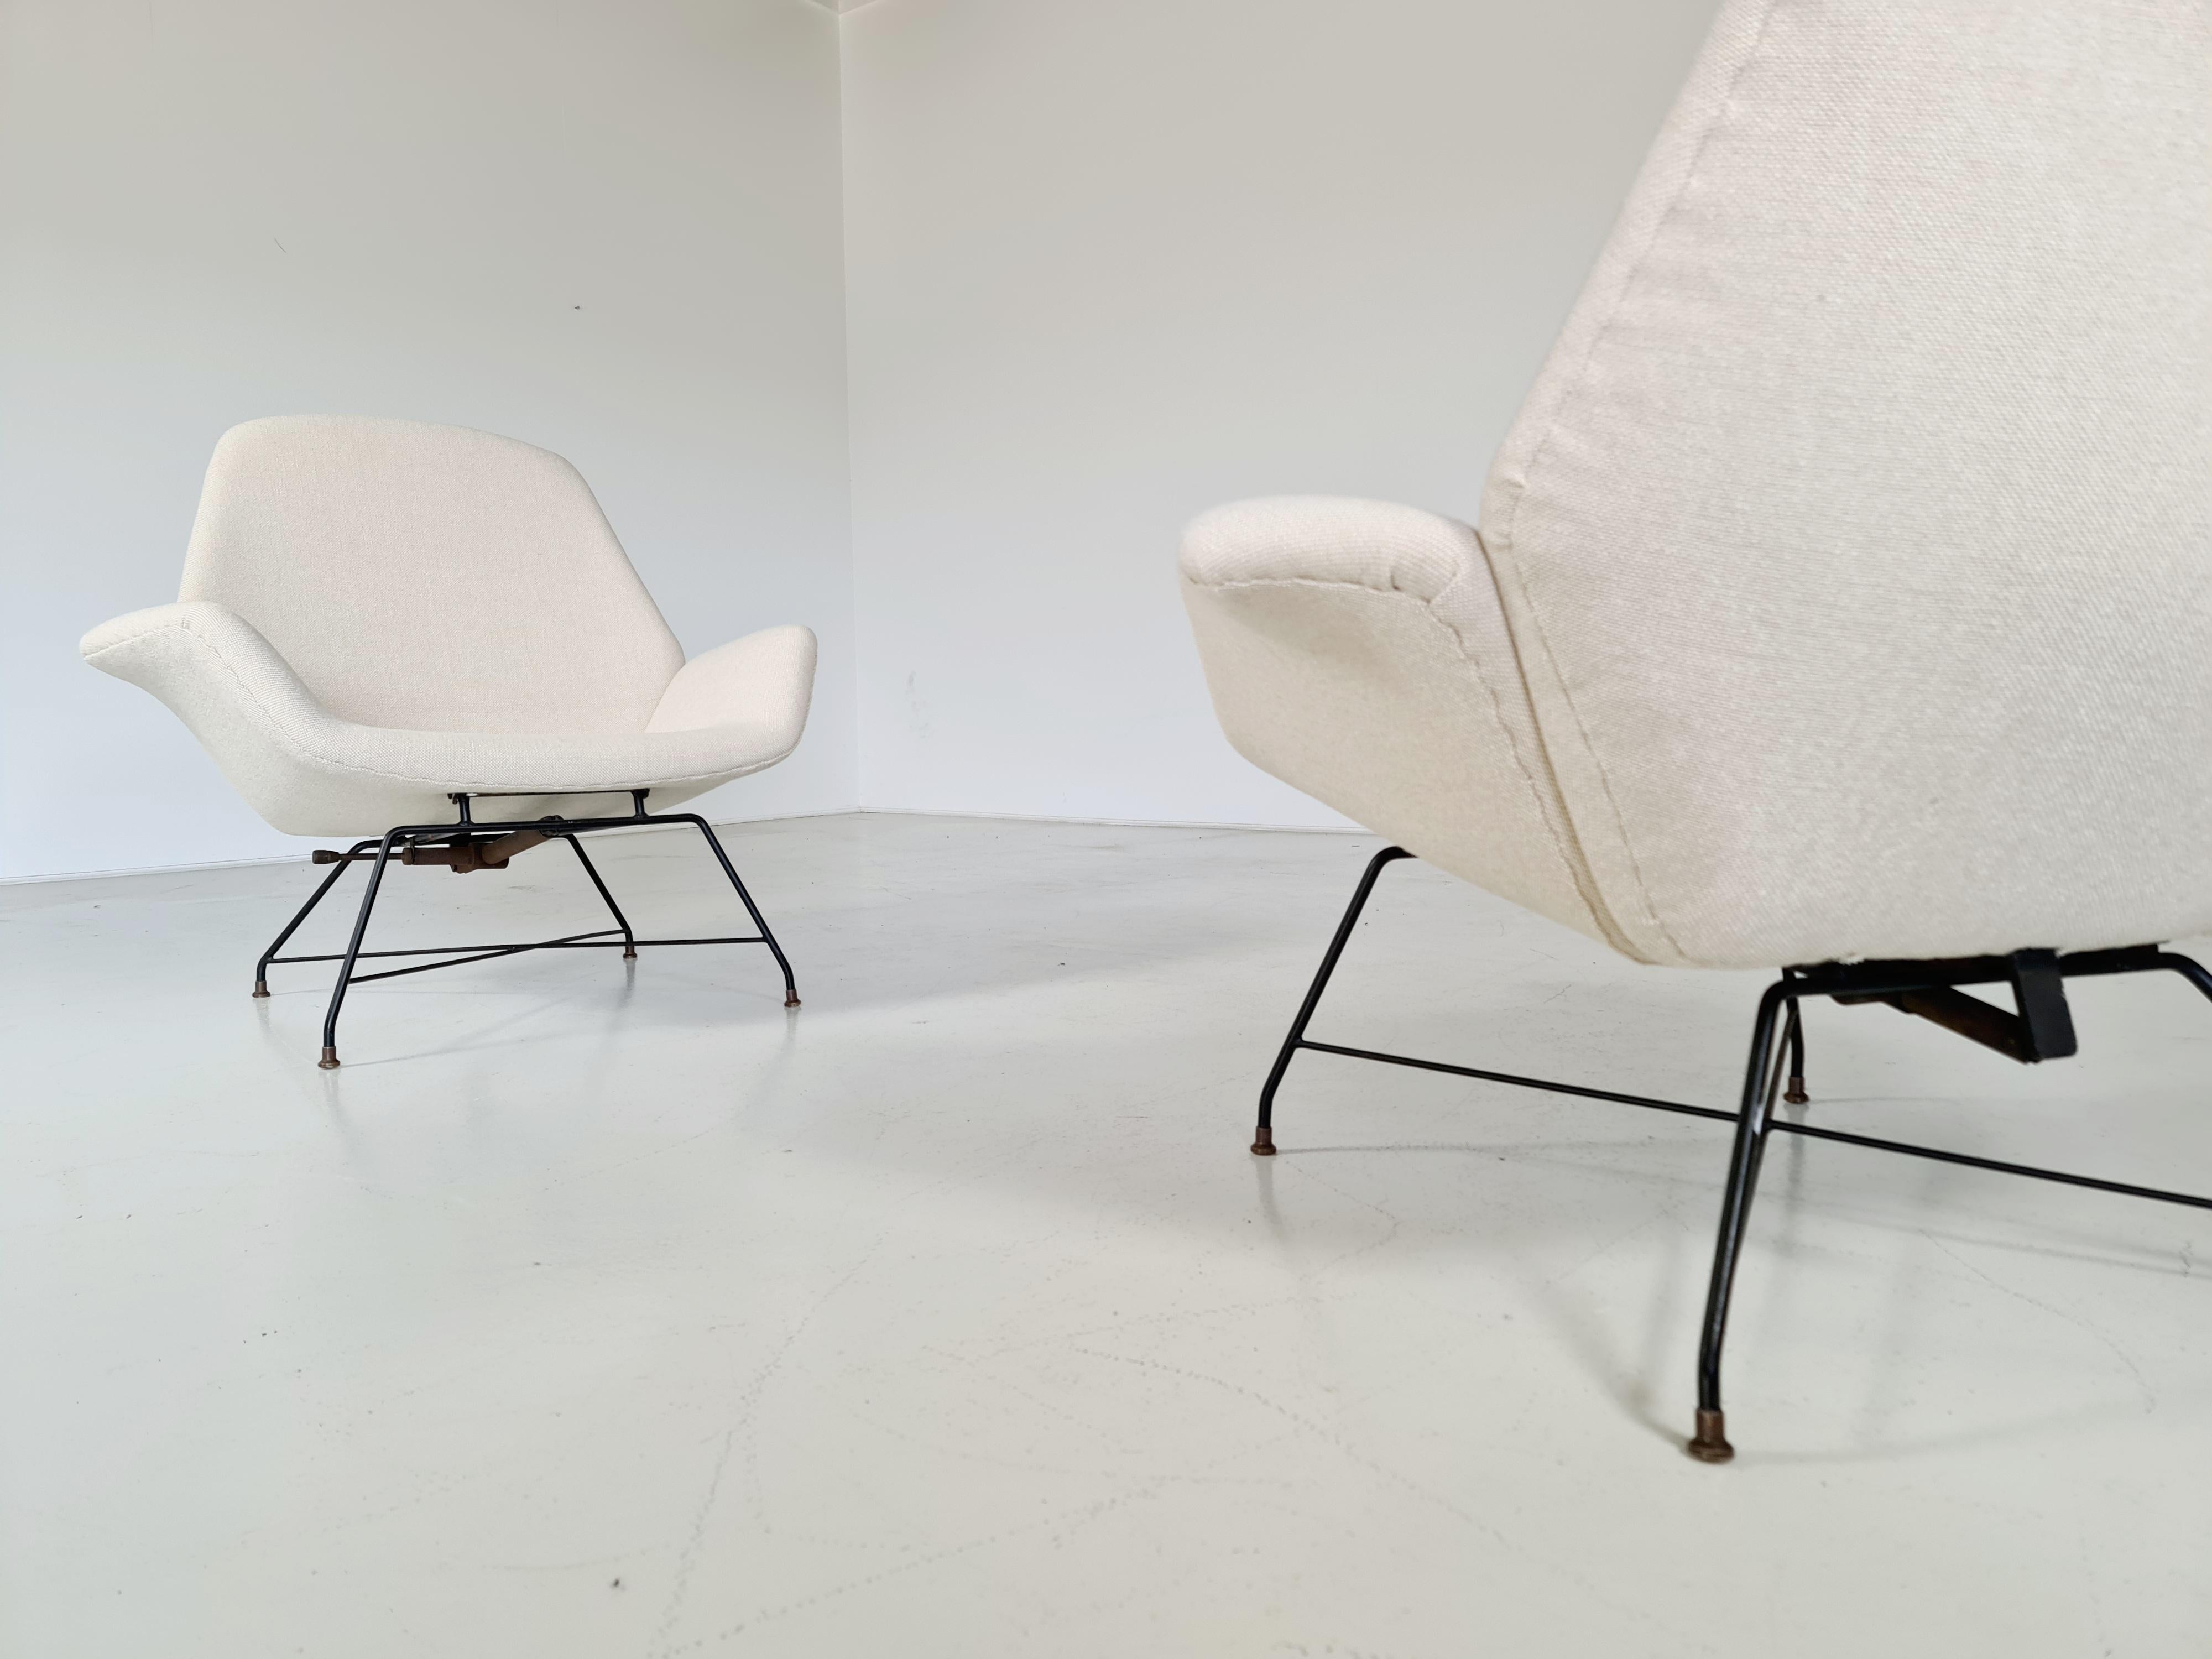 Mid-20th Century ‘Lotus’ Lounge Chairs in cream wool fabric by Augusto Bozzi for Saporiti, 1960s For Sale